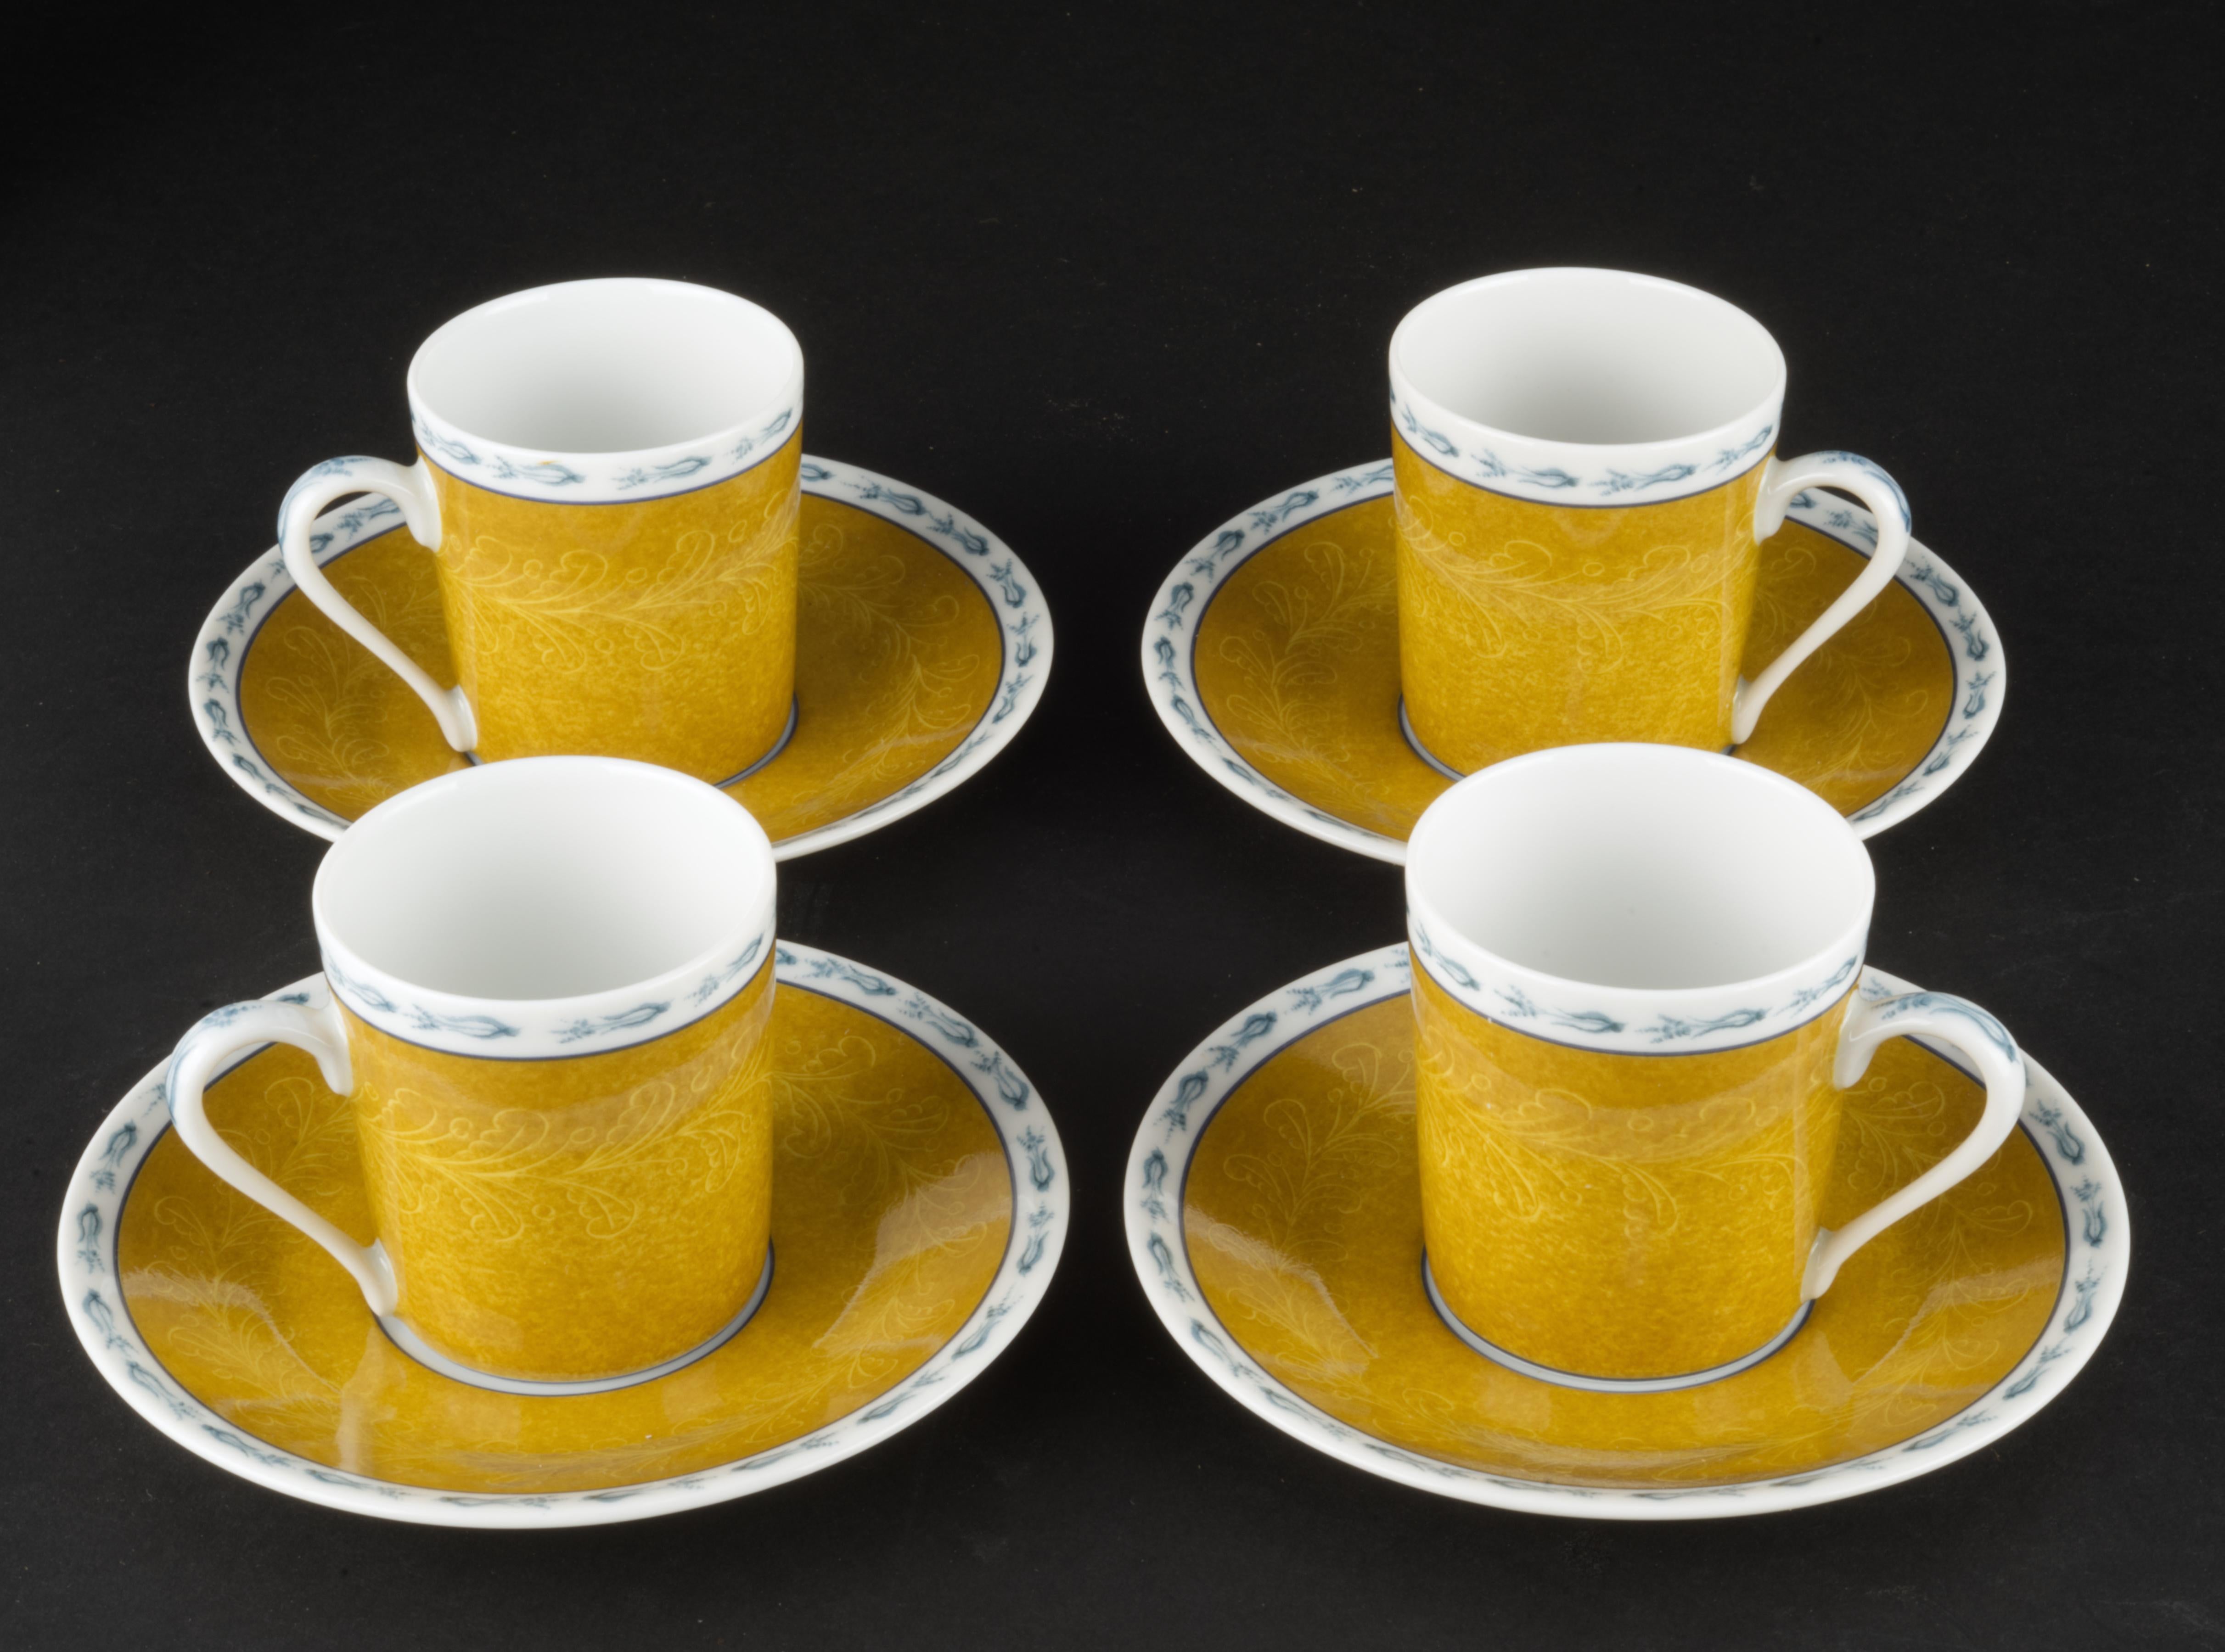 Basse Cour by Pierre Frey set of 4 Demitasse Cups and Saucers, Limoges Porcelain For Sale 8